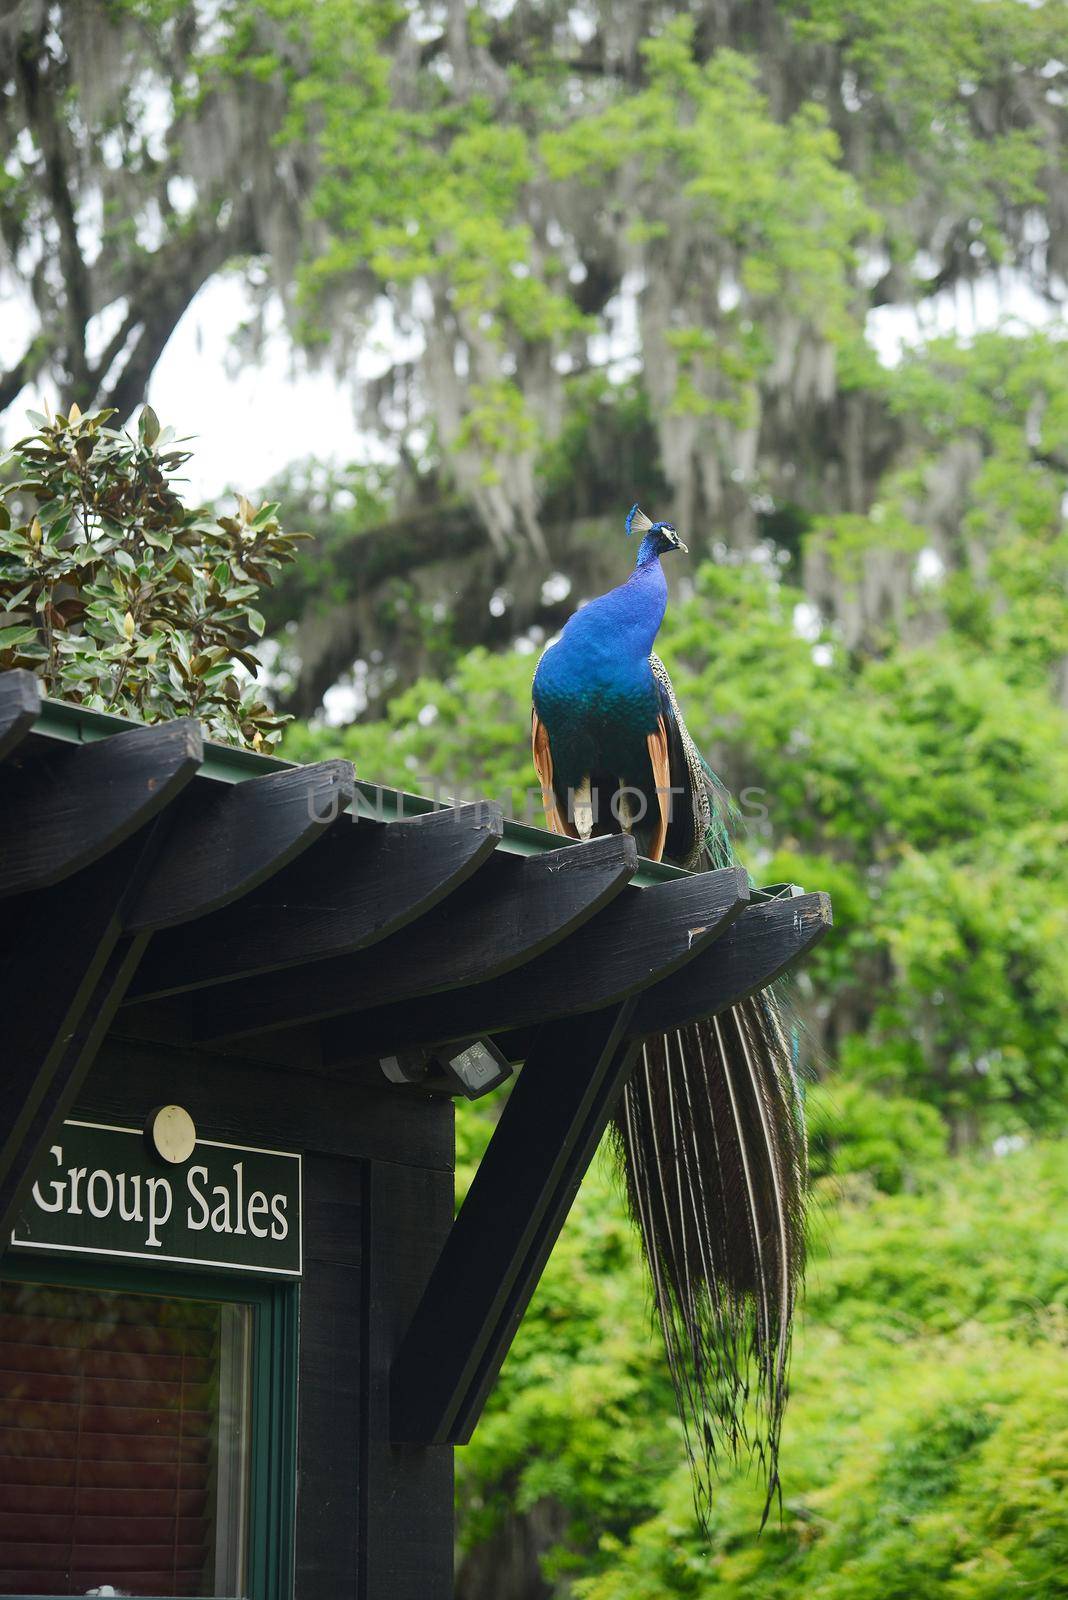 a peacock on top roof at magnolia botanical garden near charleston